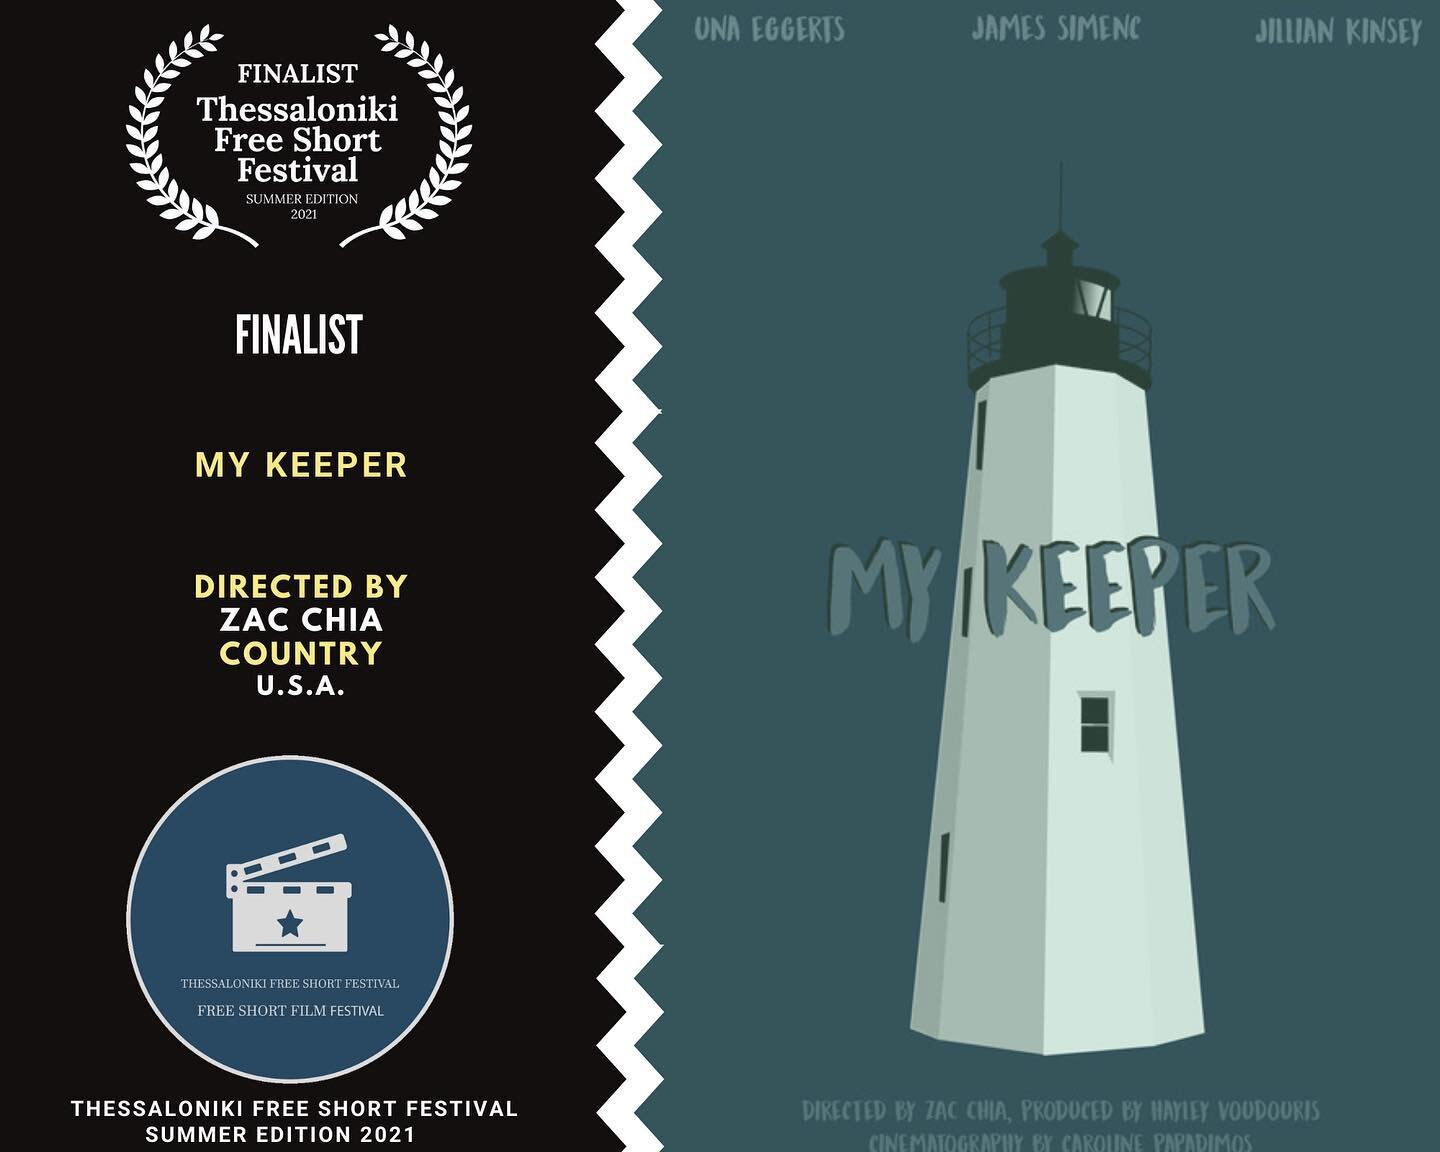 'My Keeper' was nominated for TWO awards at @thessalonikifreeshortfestival this past weekend! 

✨ Best Romance Short Film &amp; Best Poster ✨

Unfortunately no wins, but it's a huge honor to be nominated! Especially since it's my dad's hometown! 

Ca